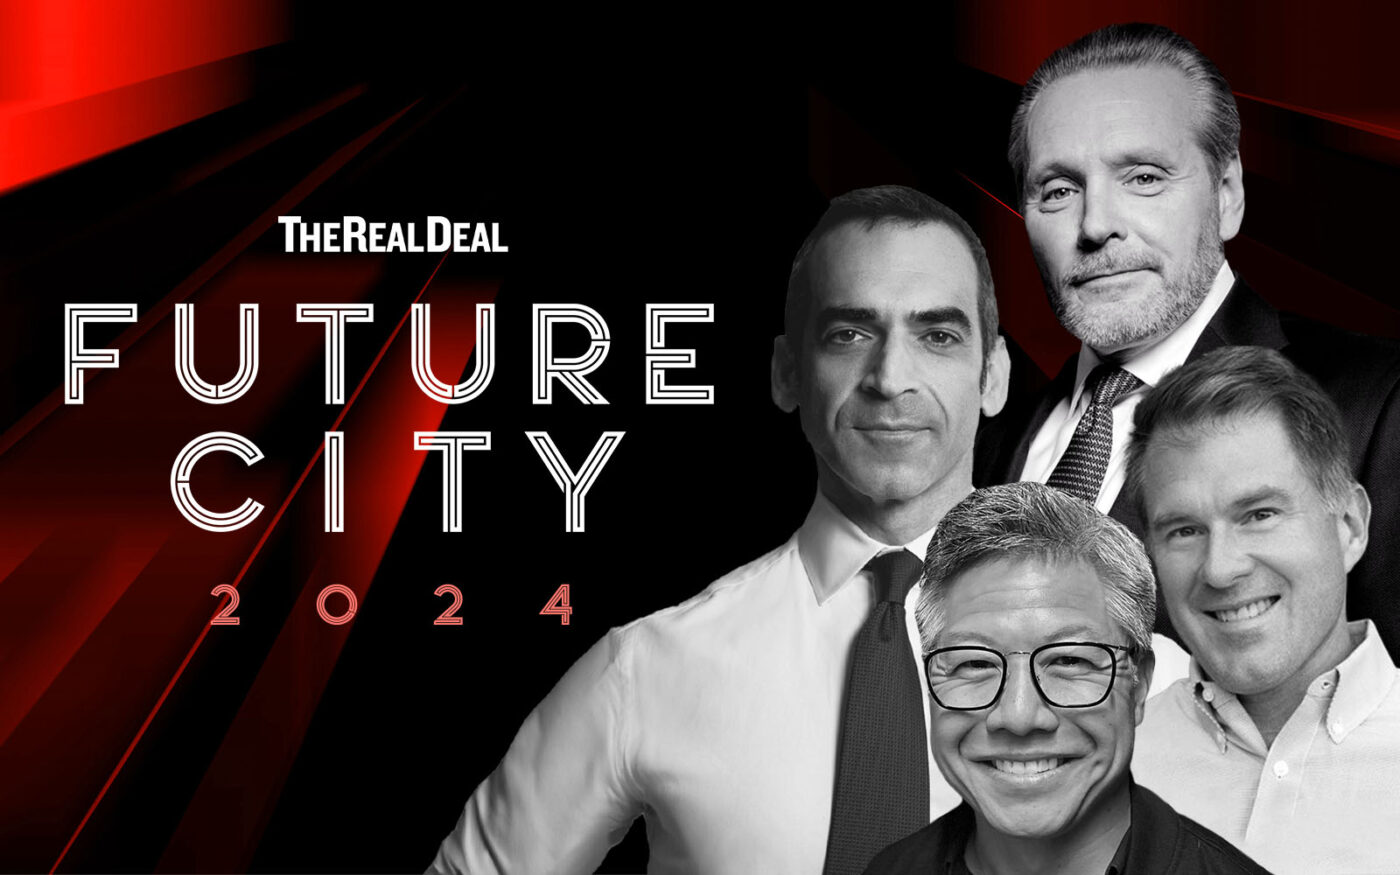 Join These Real Estate VIPs at The Real Deal’s Future City